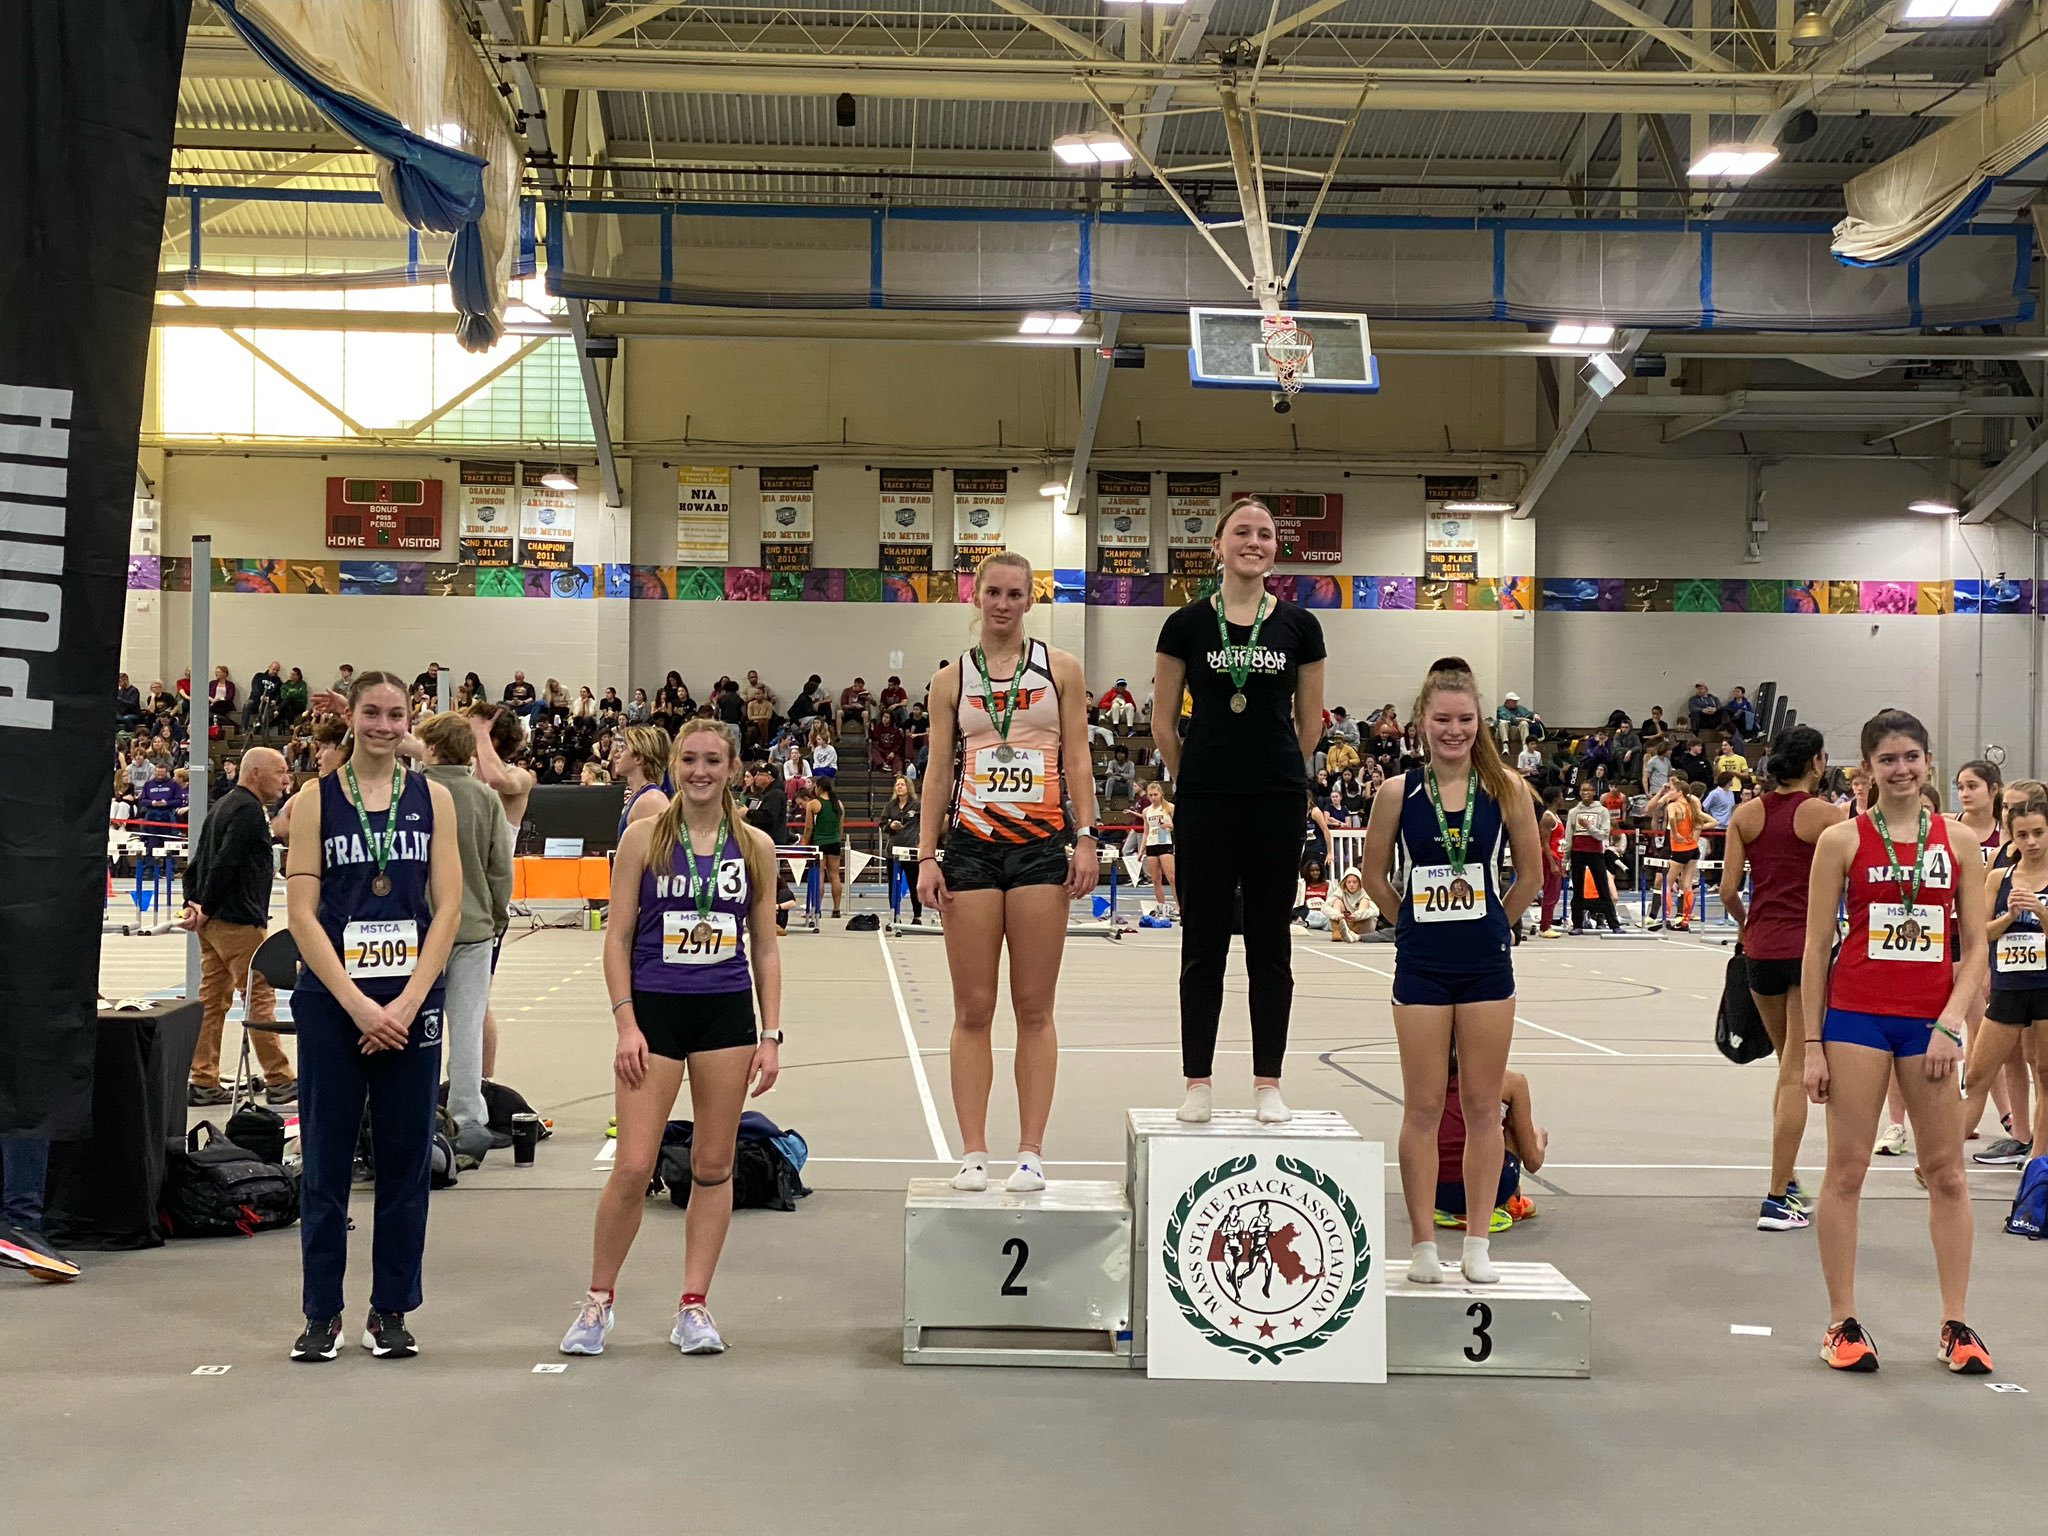 Congrats to Sarah Dumas for taking first place over all in the pentathlon w/ 3133 points. Ella Chandaria also earned 6th place with 2253 points. Awesome job!!!